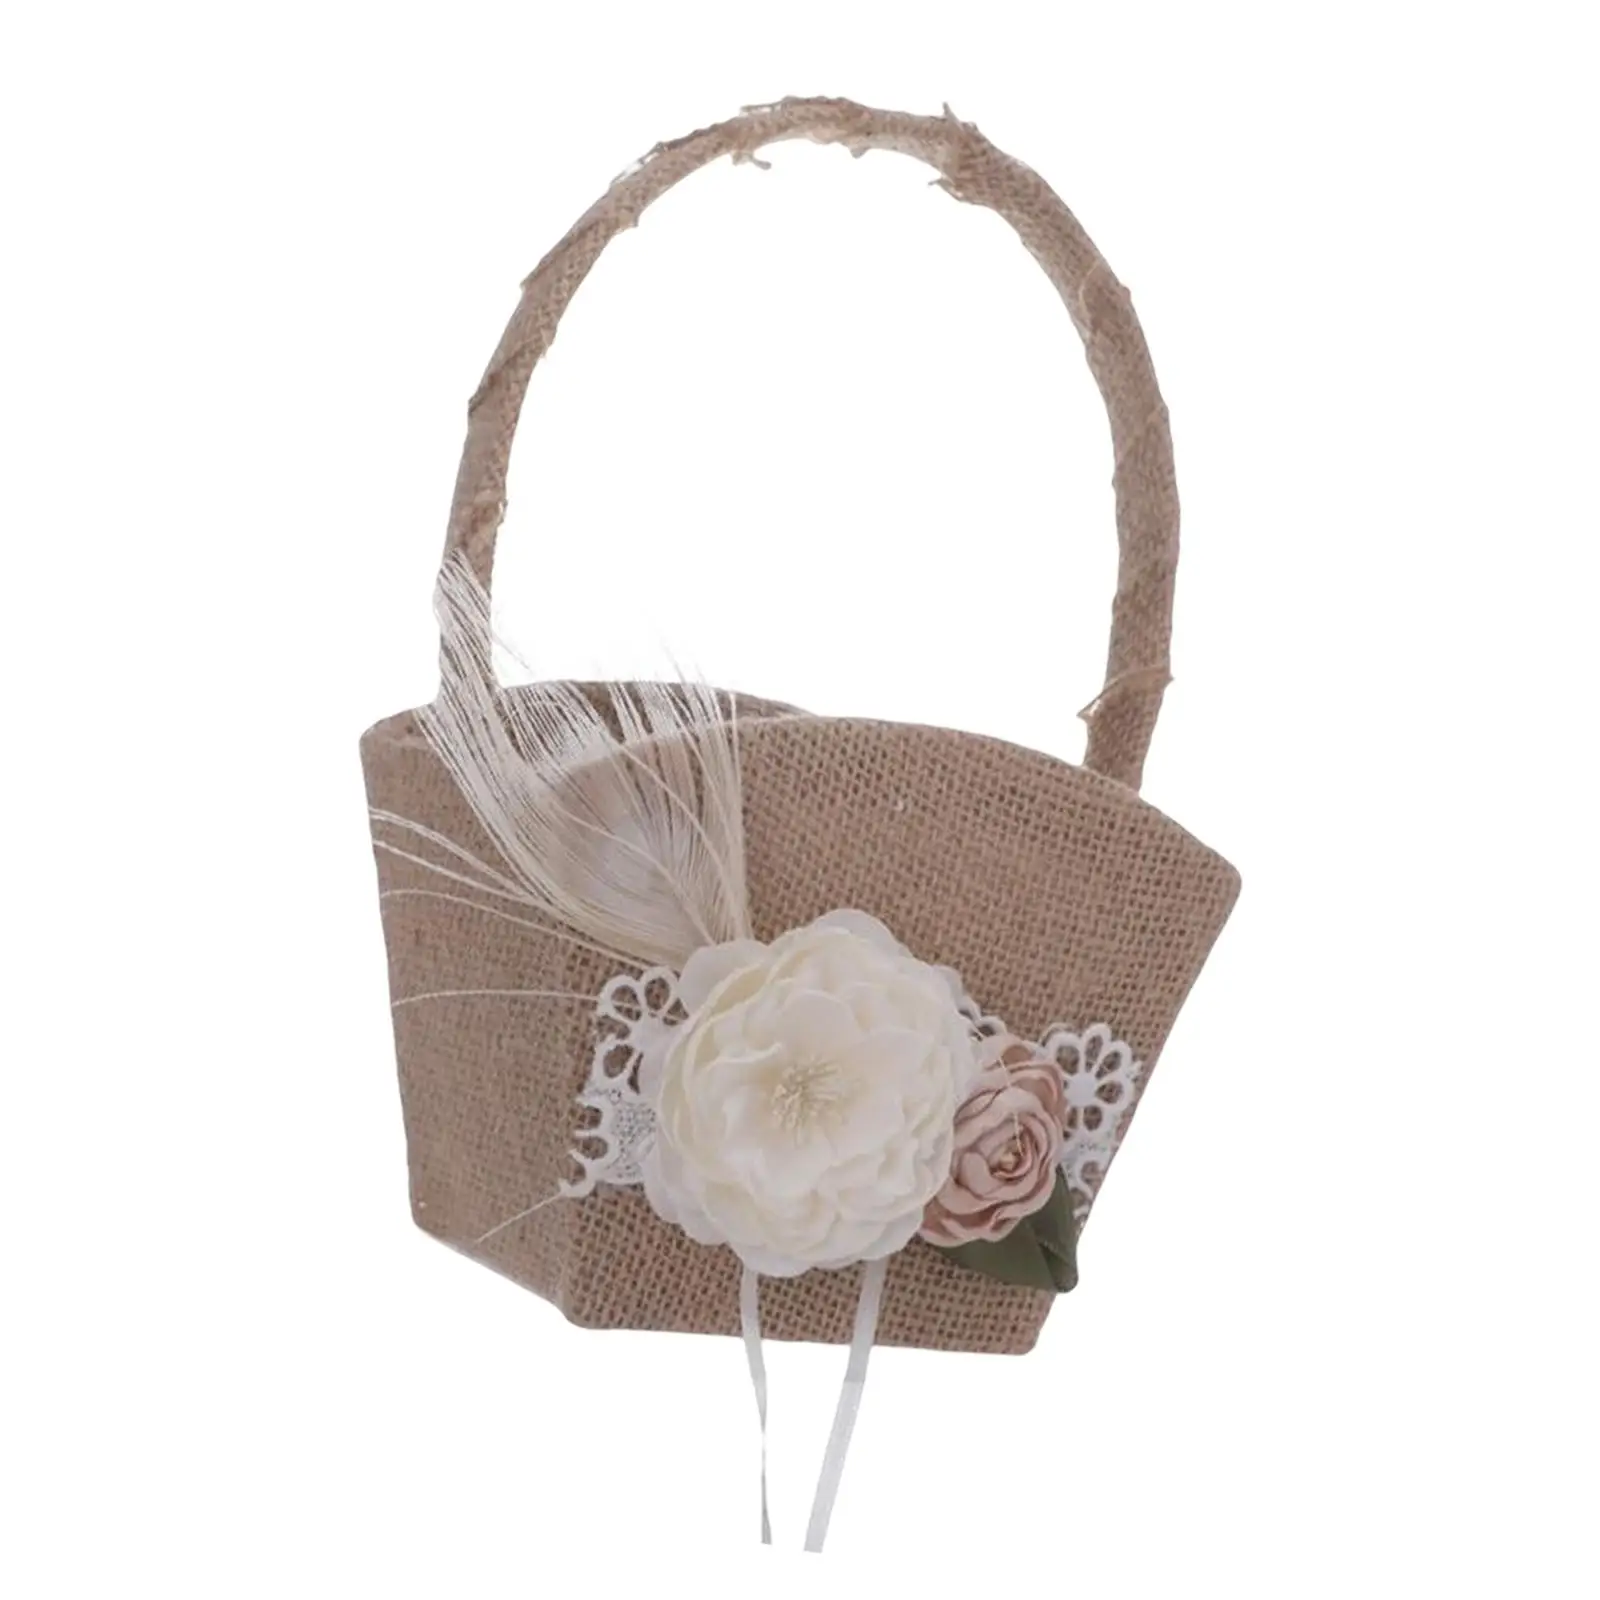 Romantic Flower Basket Accessories Pearl Handle Celebration Ribbon Rustic Lace satin Supplies Multifunctional for Festival